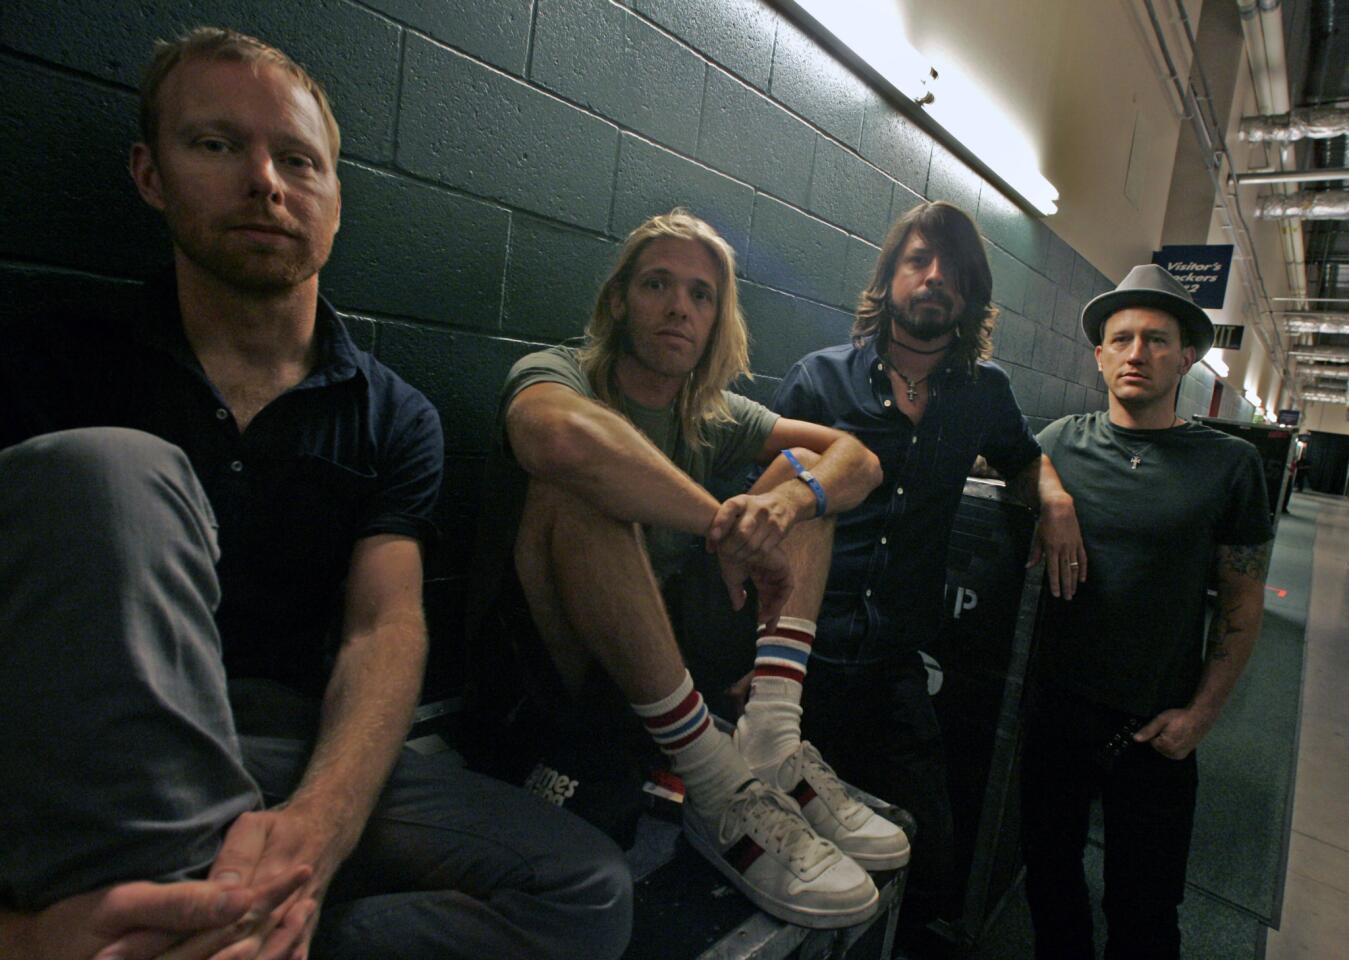 "Walk," written and performed by the Foo Fighters, won the Grammy for best rock song.